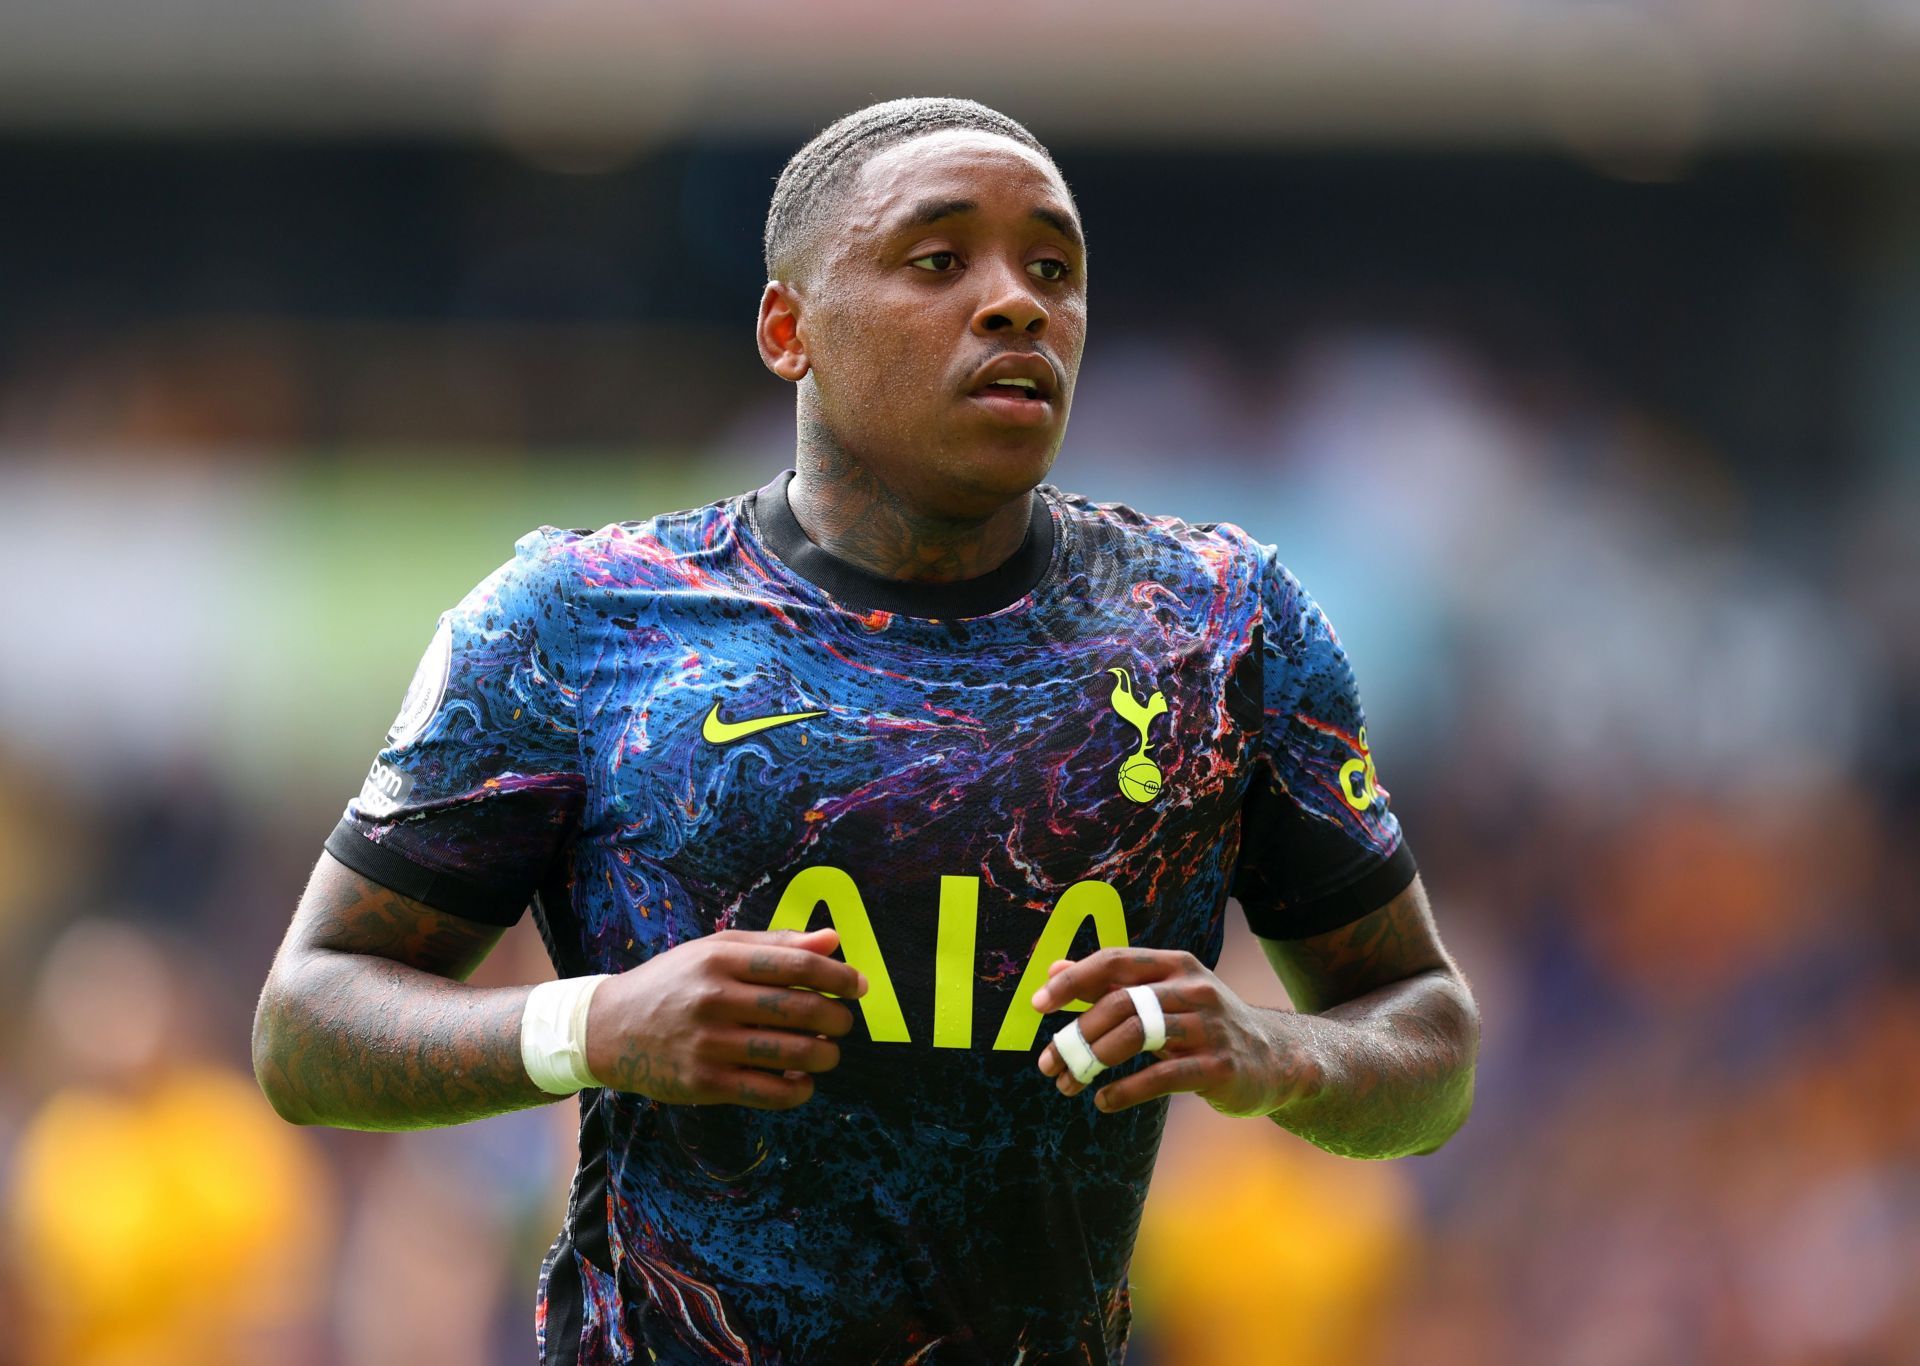 Conte has asked Tottenham hierarchy to find a buyer for Bergwijn as per reports